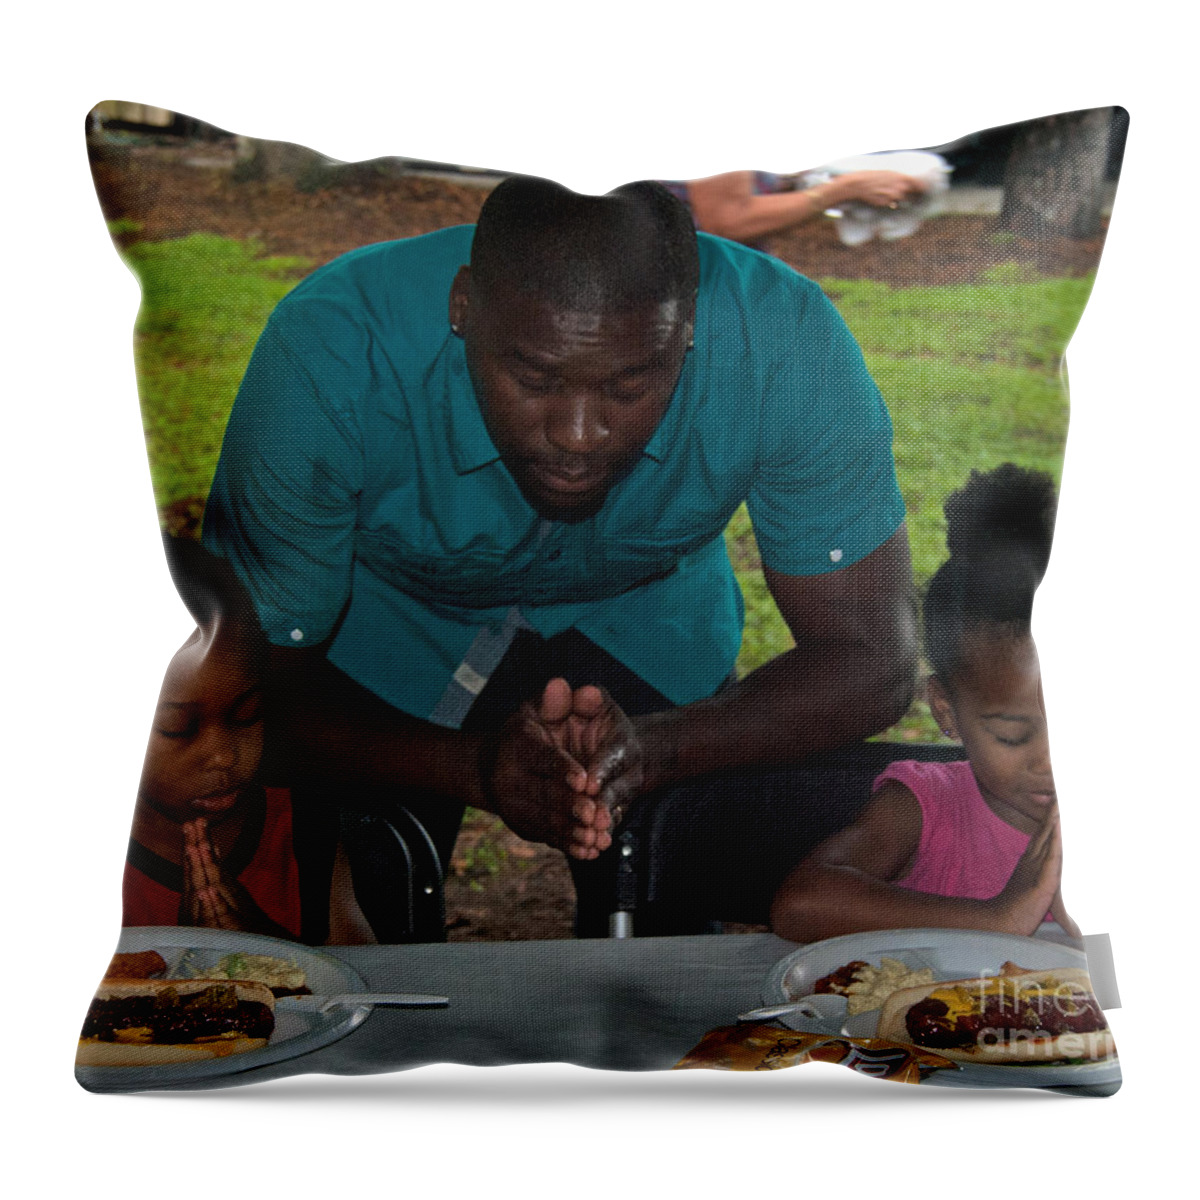  Throw Pillow featuring the photograph Guest Family Praying by George D Gordon III